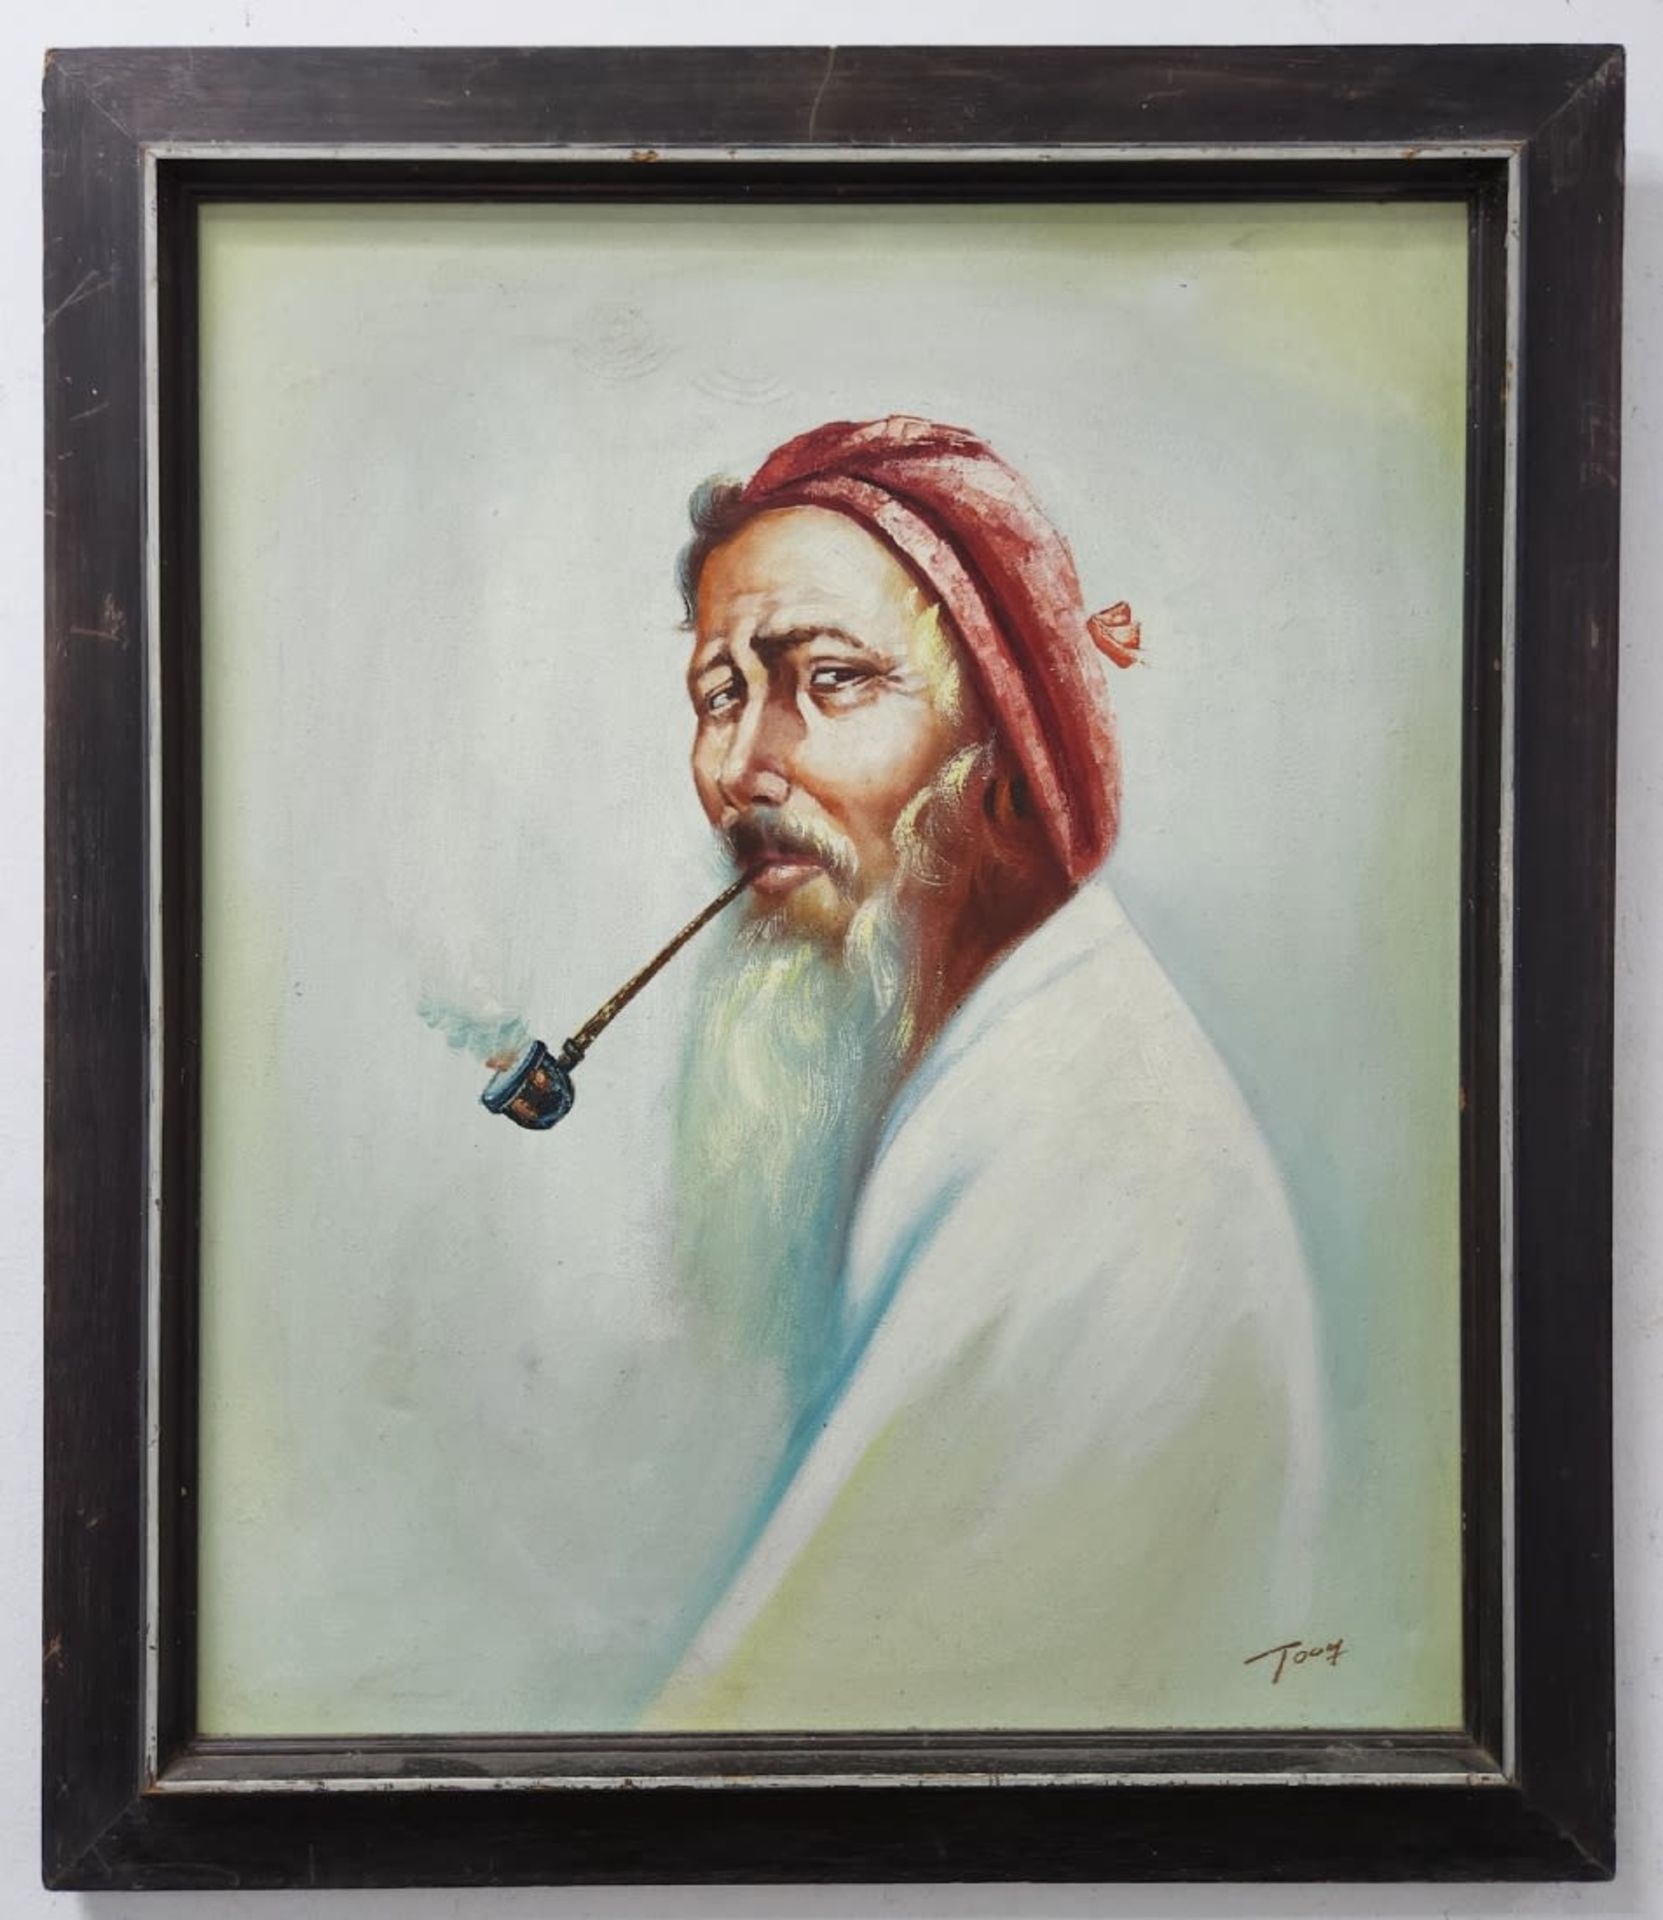 'Pipe smoker' - painting, oil on canvas, signed. Dimensions: 59.5X49 cm. Frame dimensions: 71.5X61 - Image 2 of 3